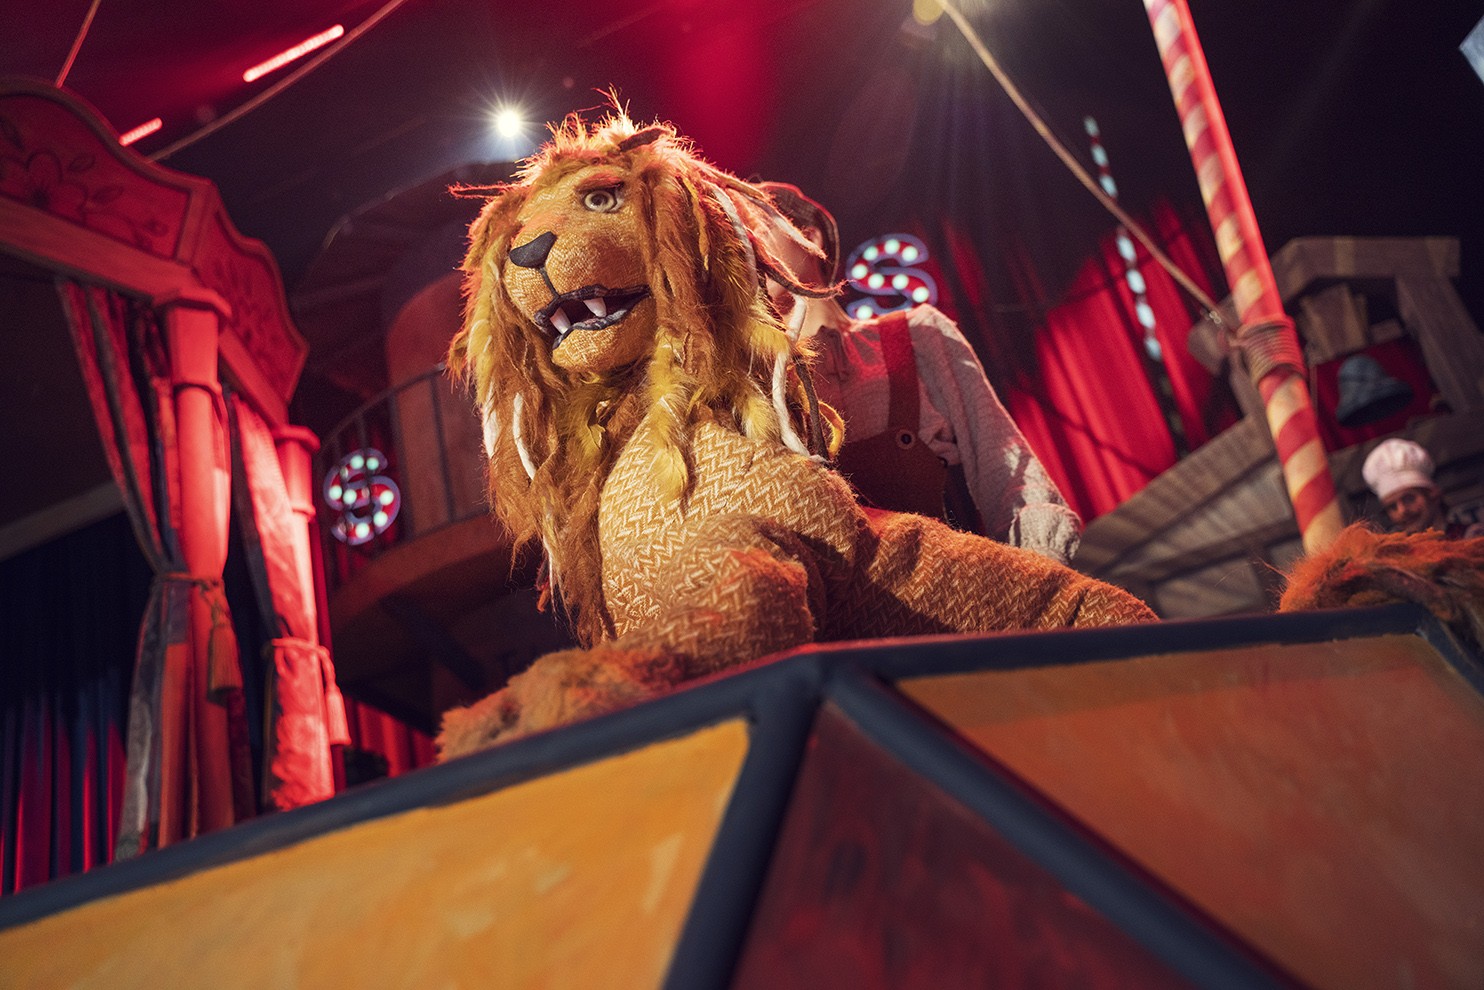 The lion puppet onstage.